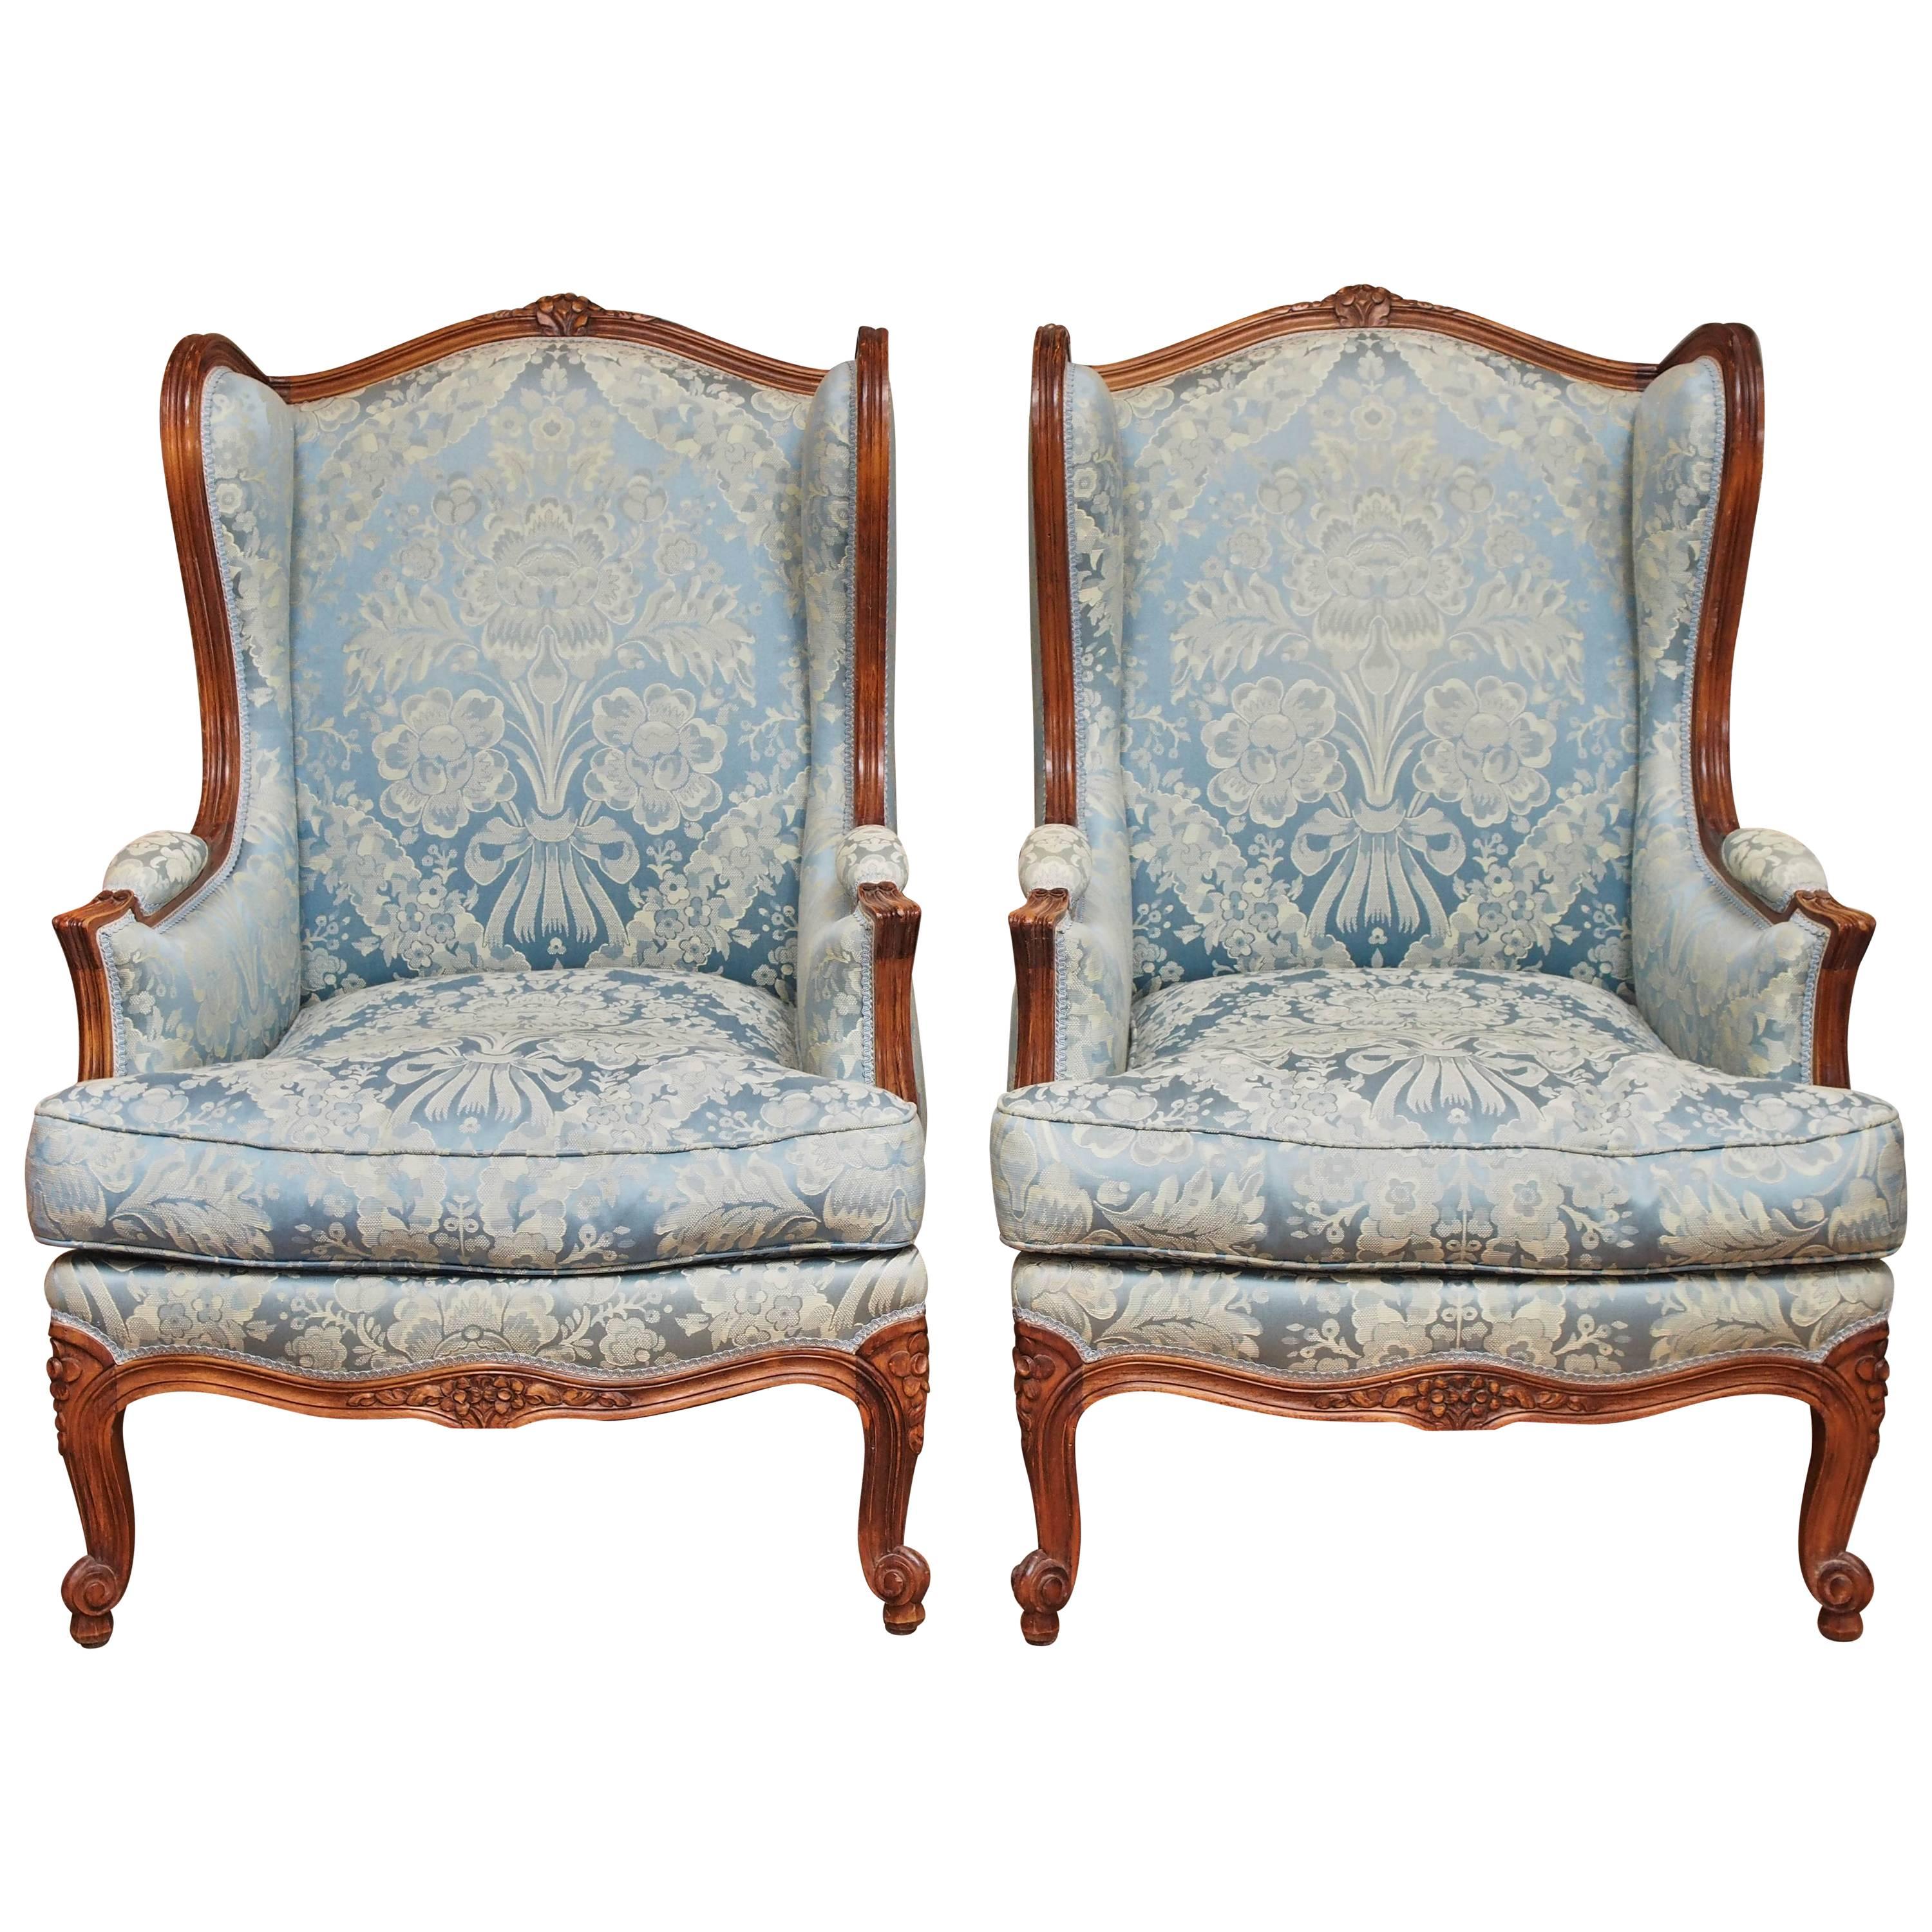 Pair of 19th Century French Louis XV Style Bergere Chairs